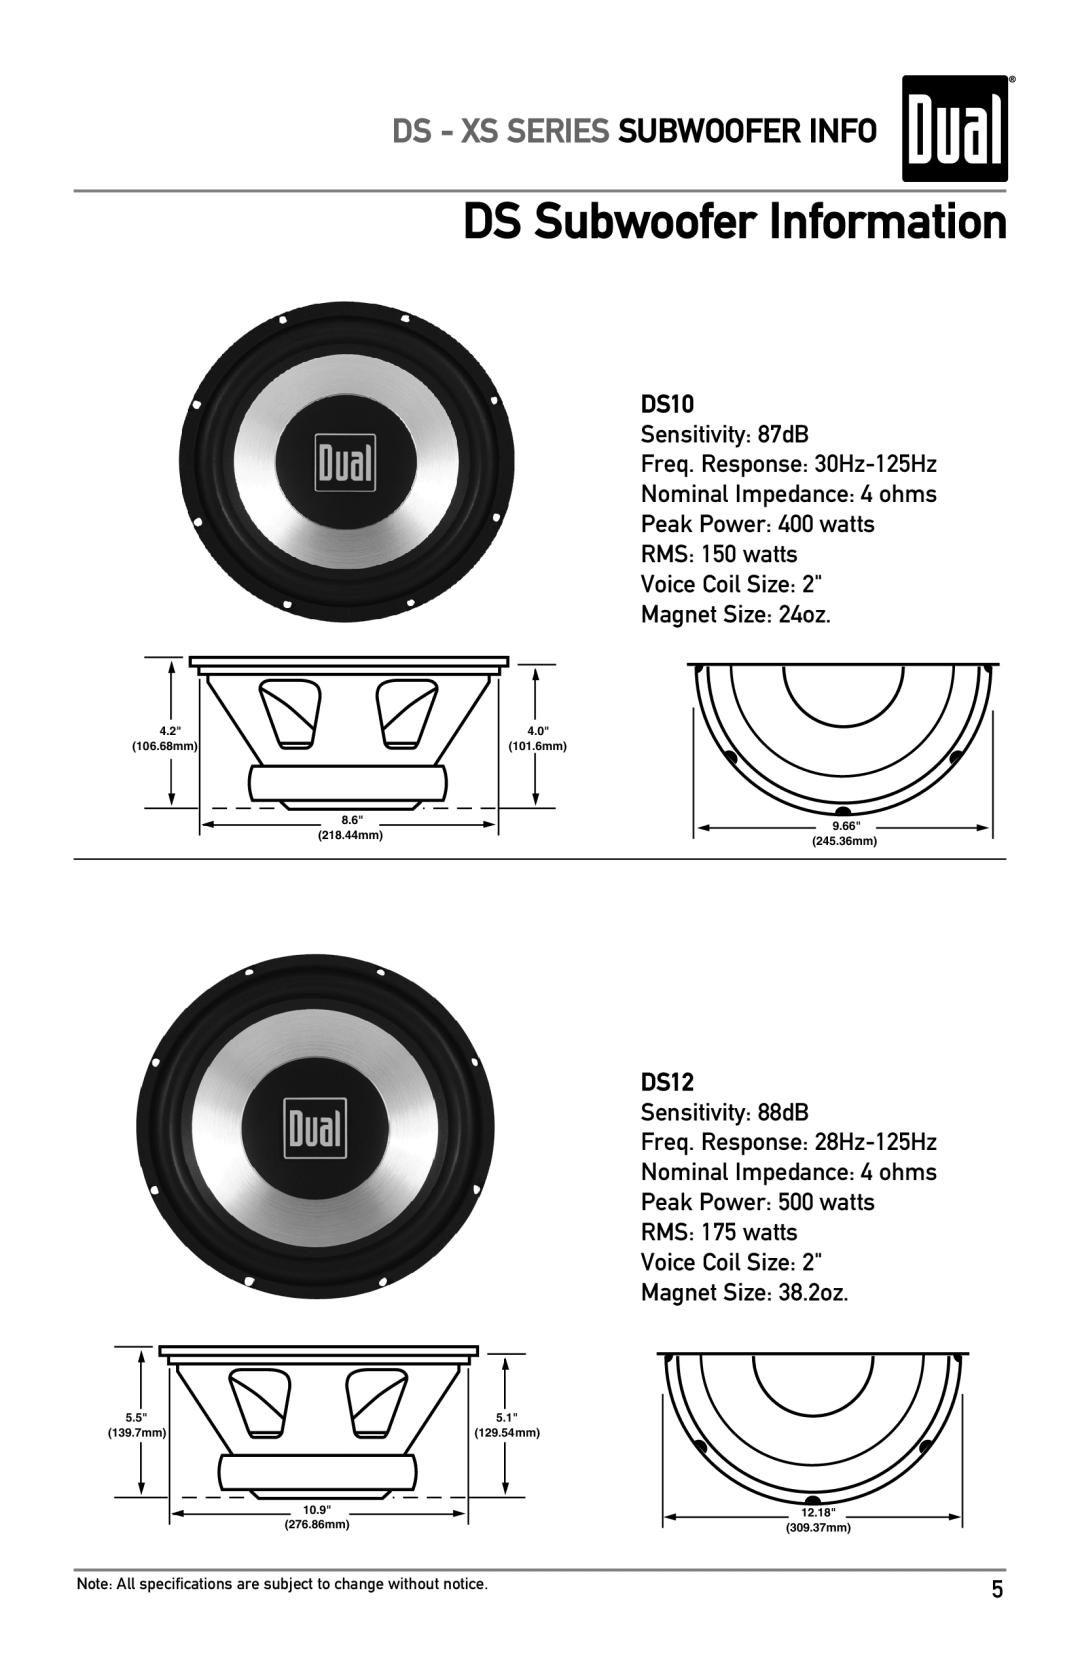 Dual DS10, XS10 owner manual DS Subwoofer Information, DS12, Ds - Xs Series Subwoofer Info 